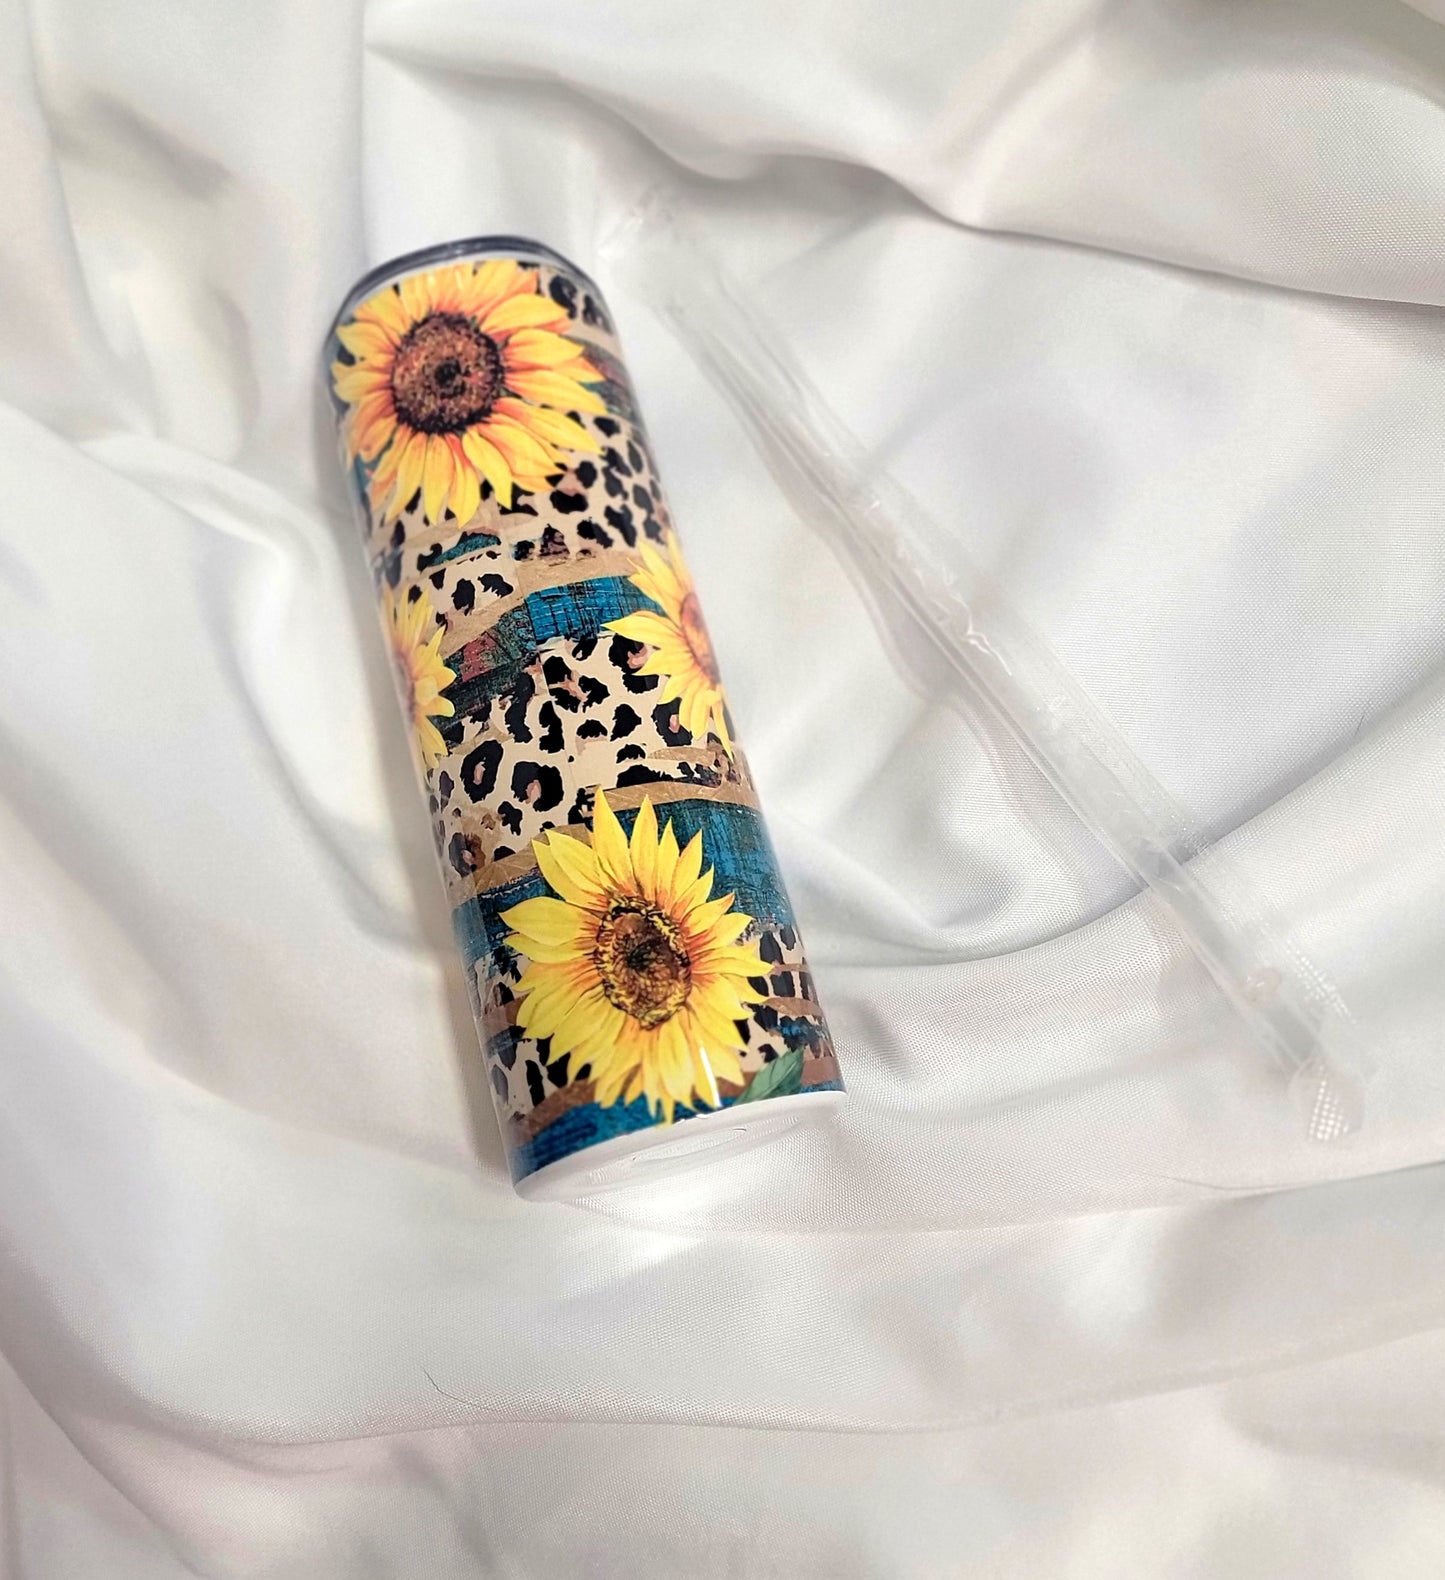 20 oz tumbler with leopard print and sunflowers